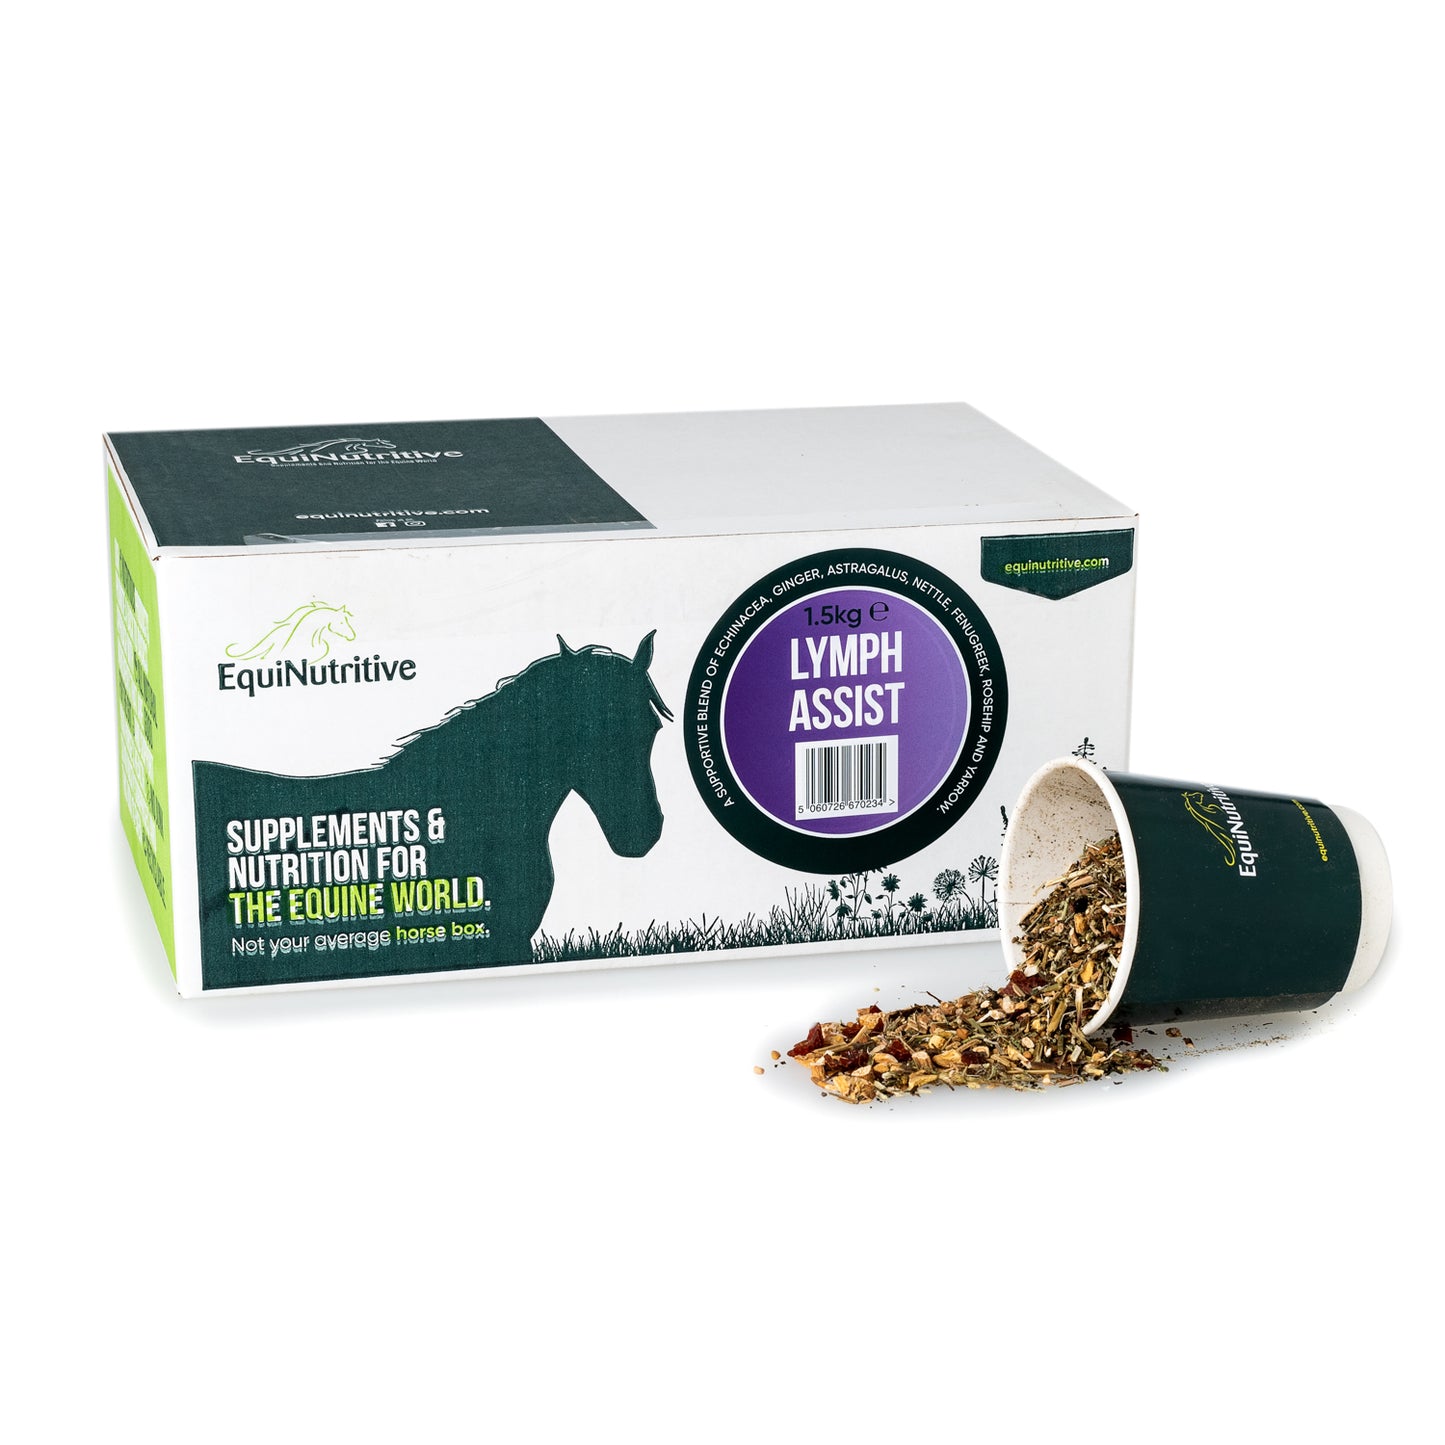 Lymph Assist - 100% Natural Lymphatic Support Supplement For Horses